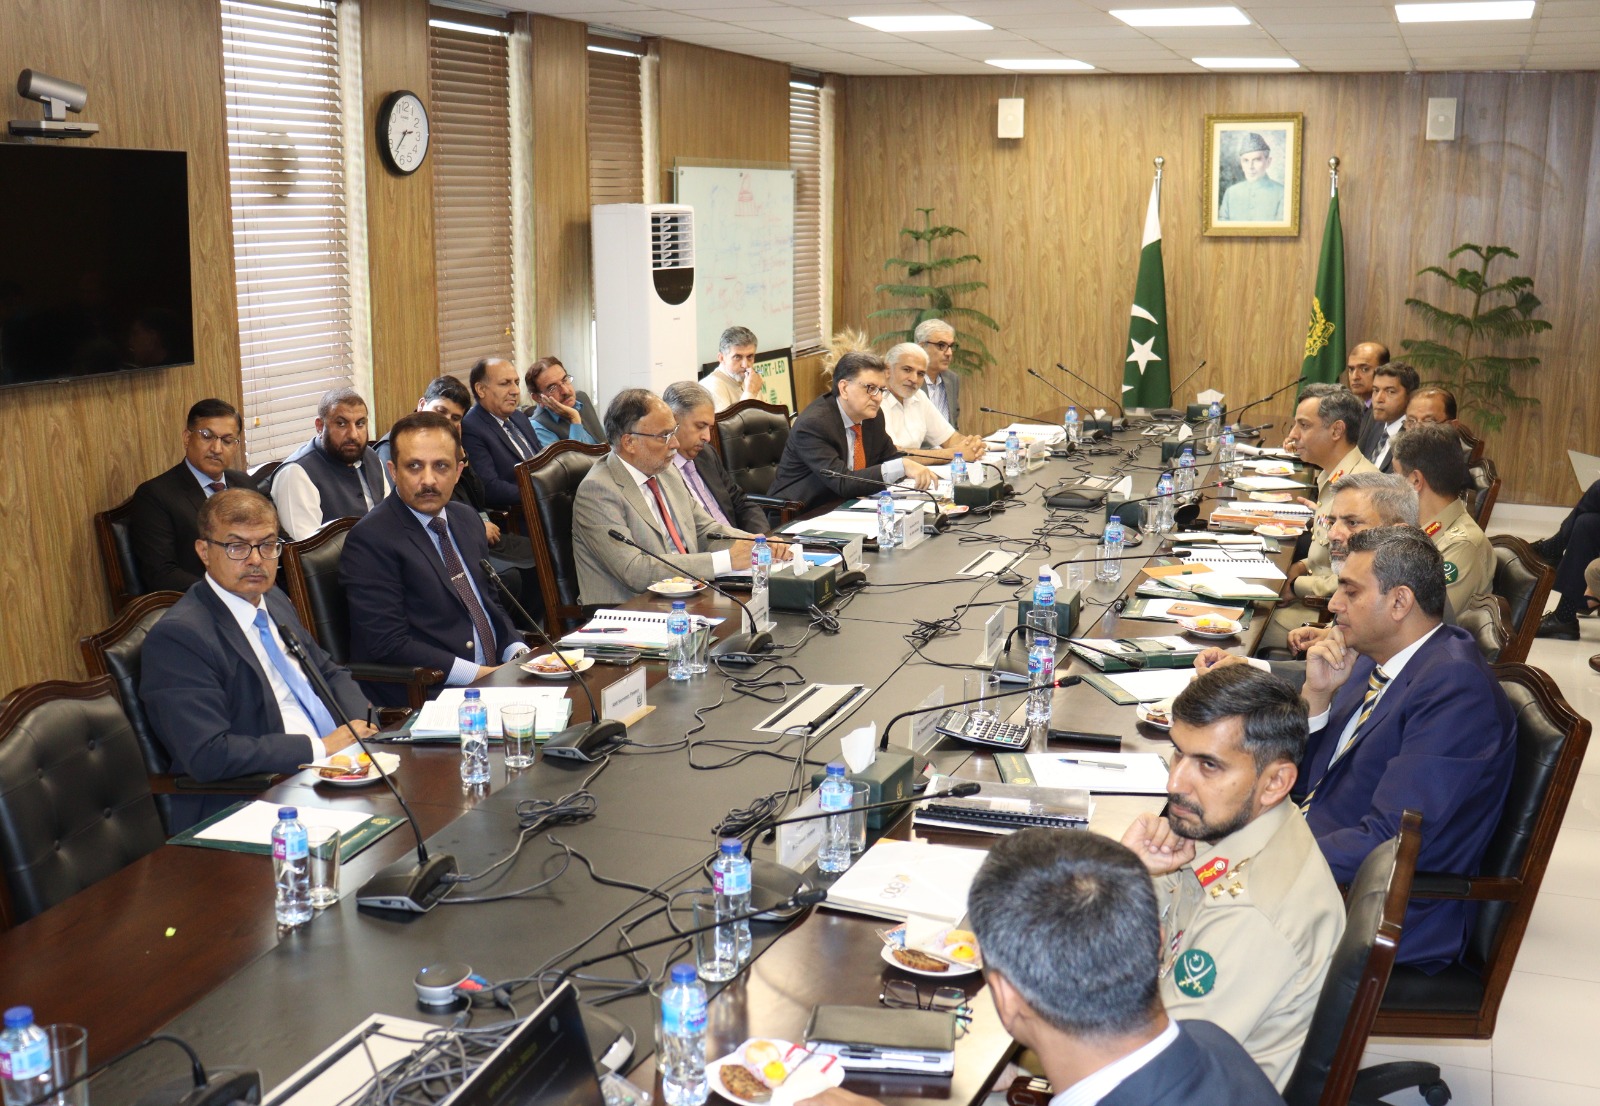 67th Meeting of National Logistics Board held.